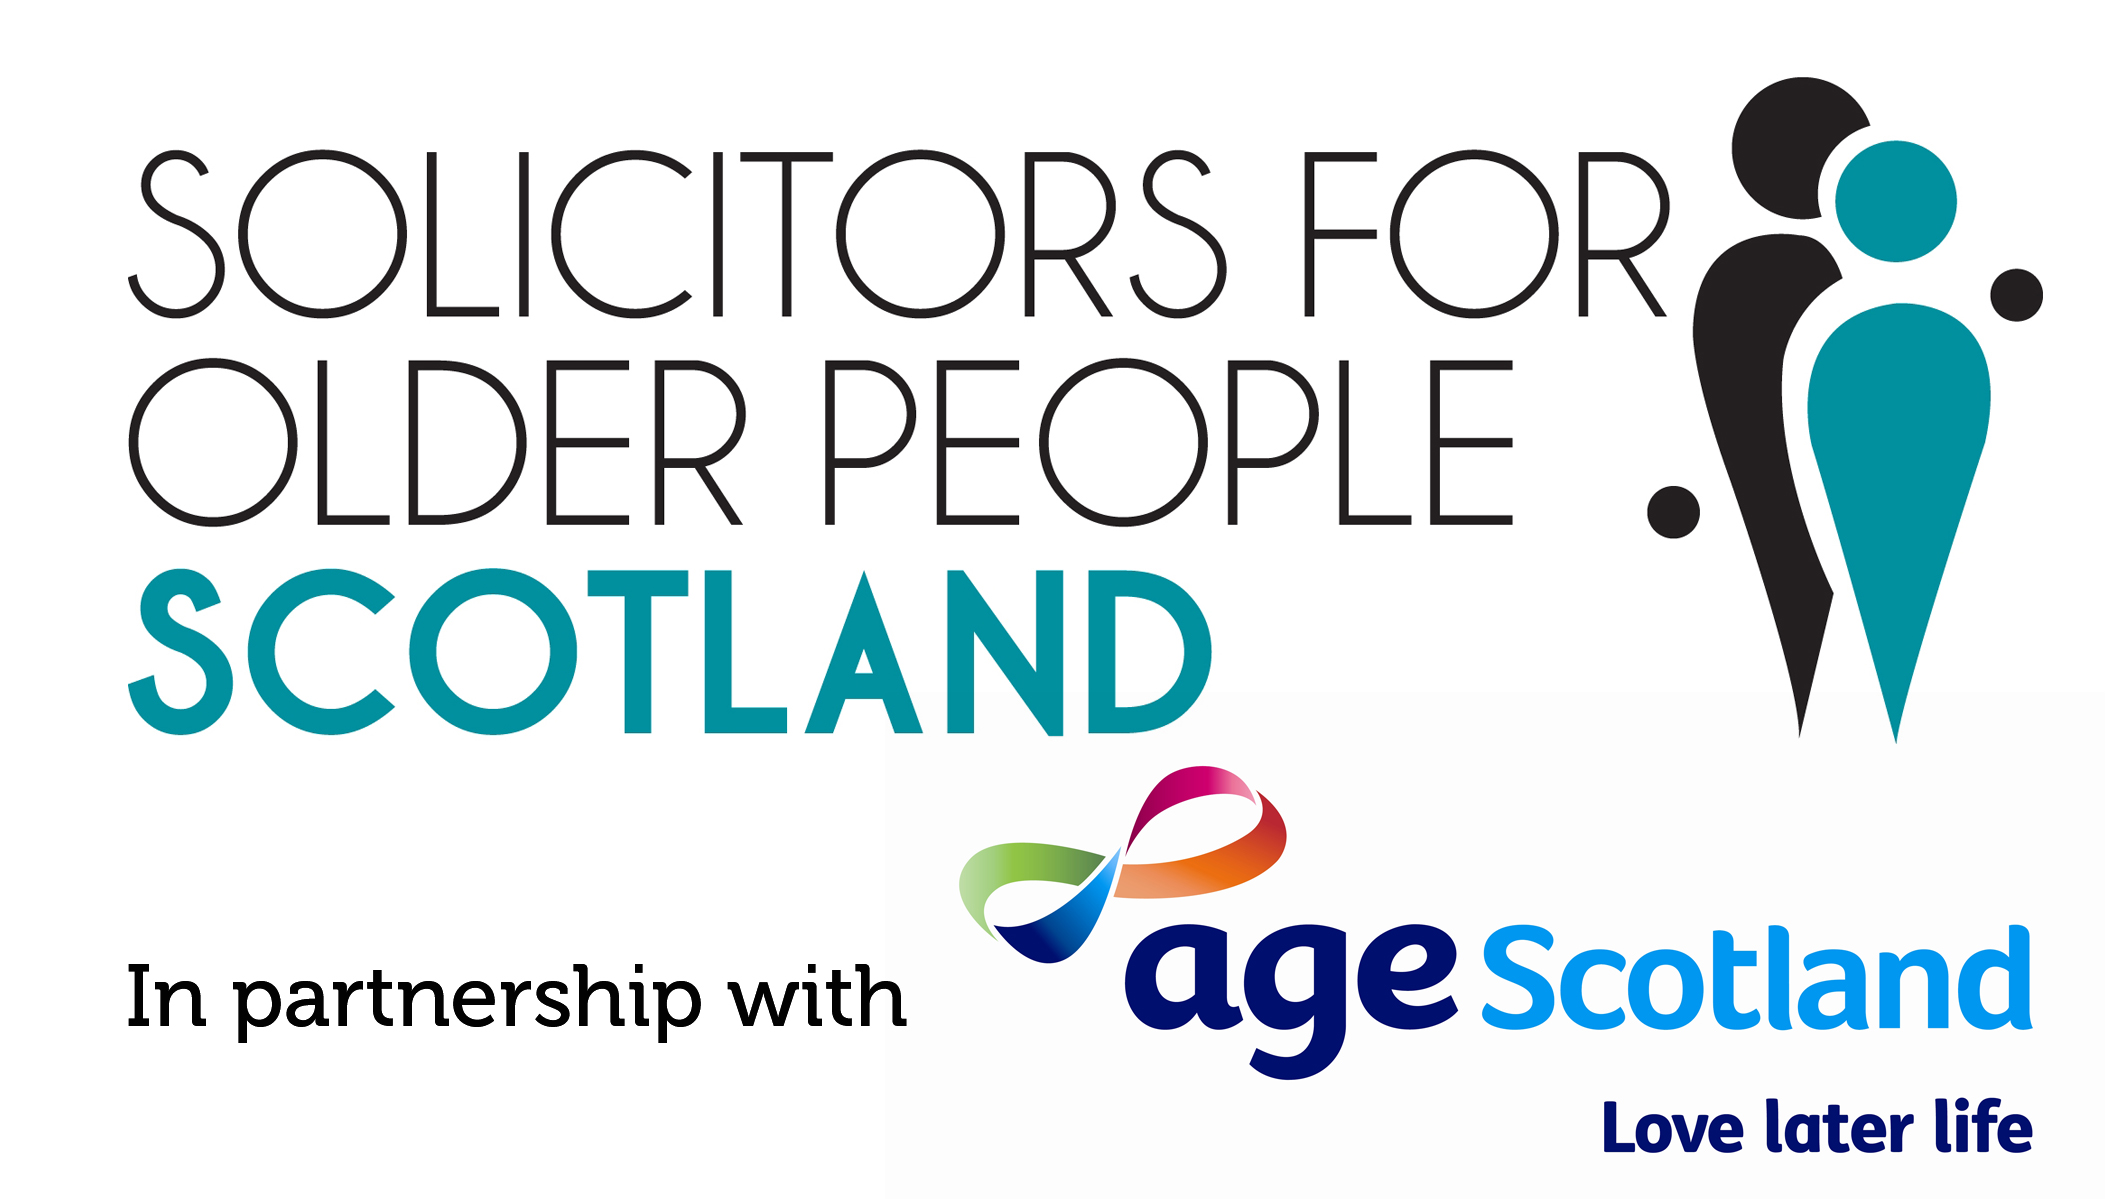 Solicitors for Old People Scotland